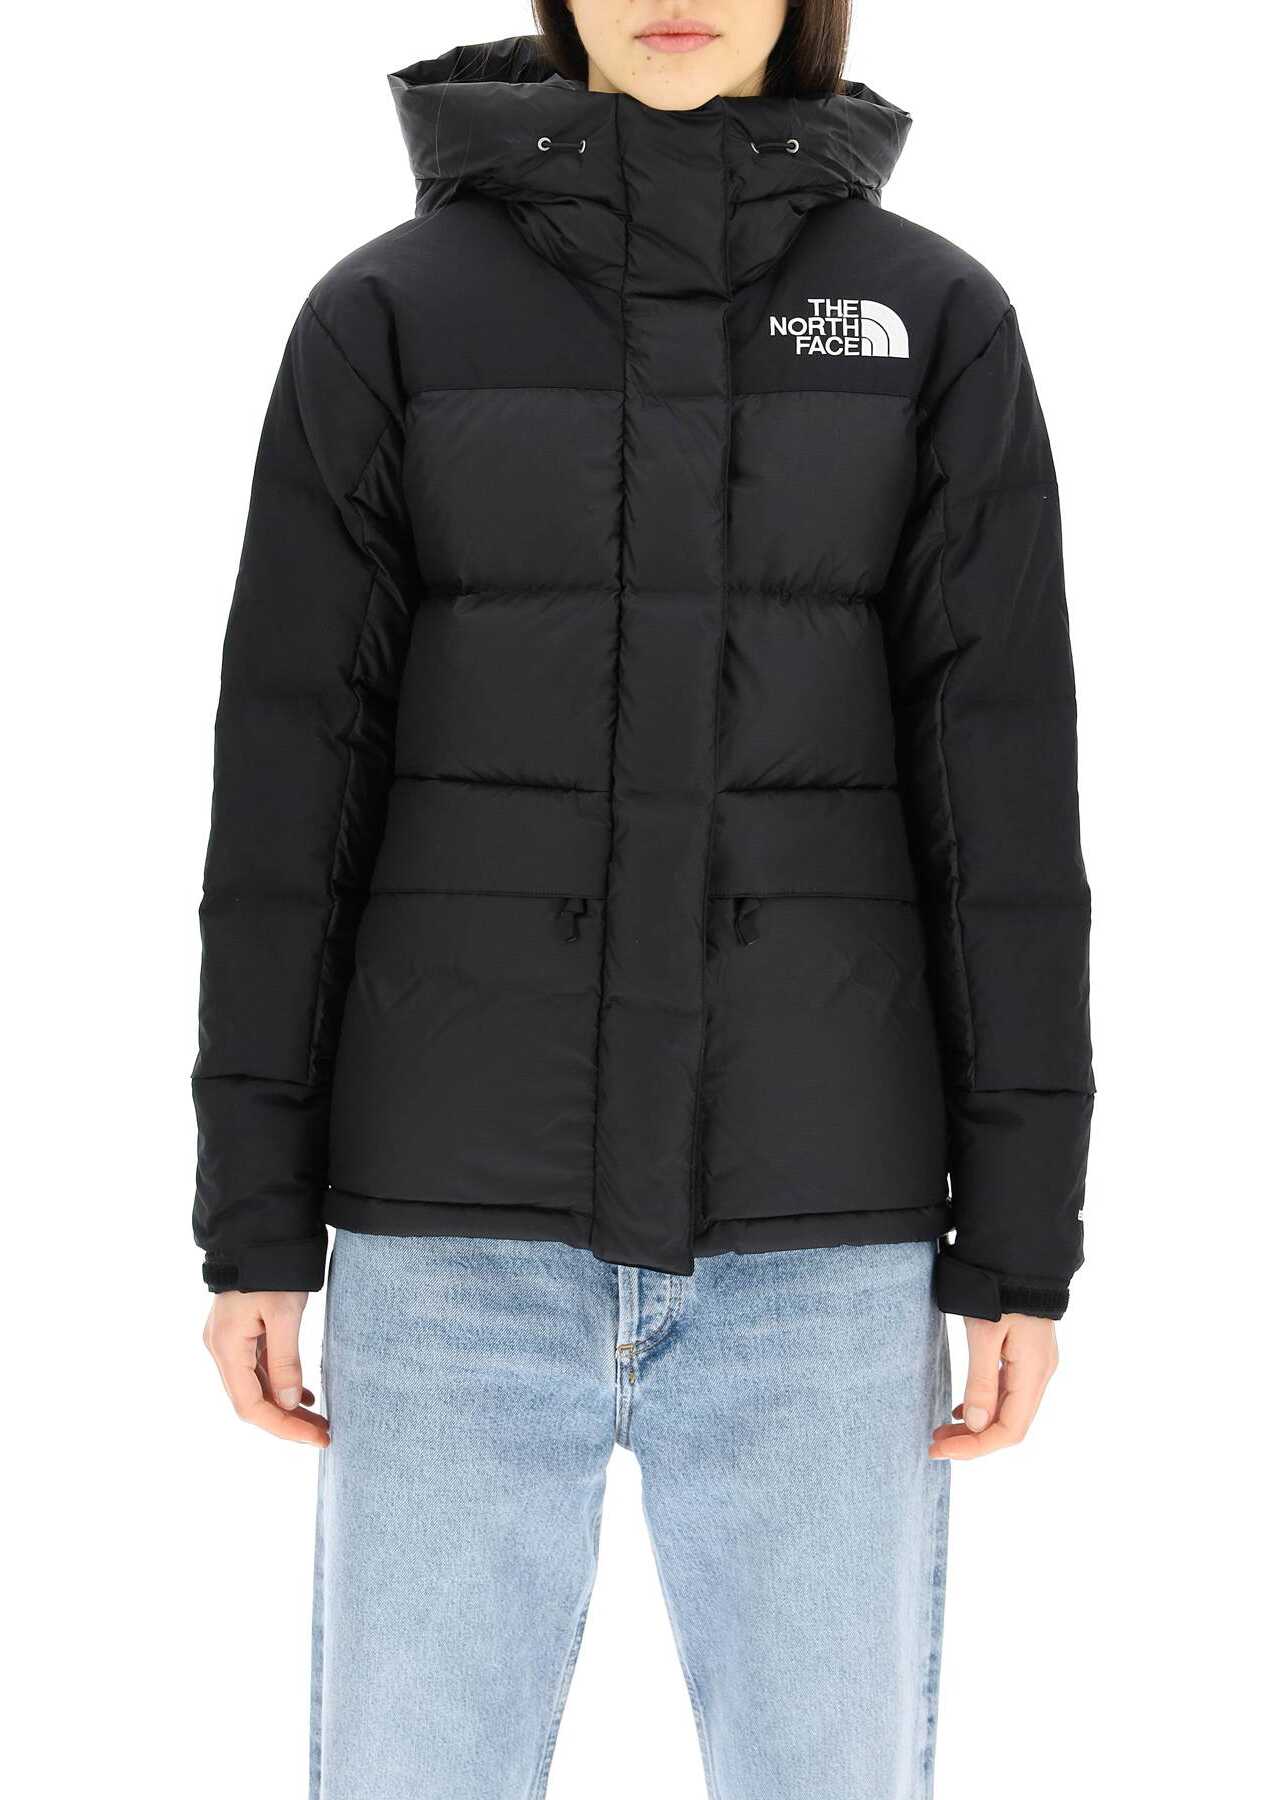 The North Face Himalayan Down Jacket 550 NF0A4R2W BLACK image